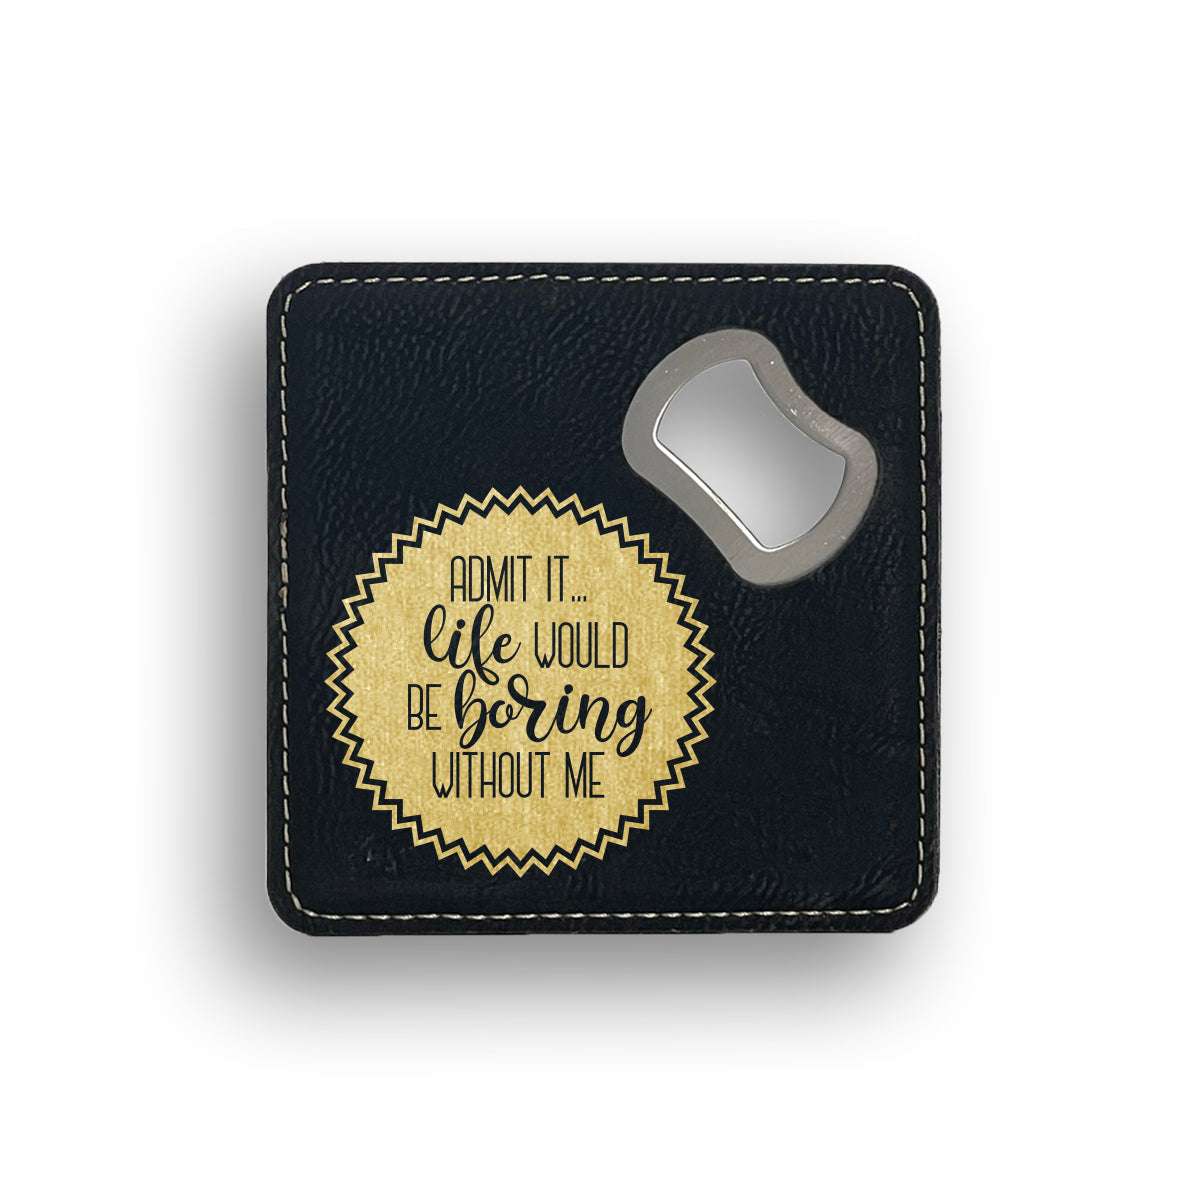 Admit It Life Would Be Boring Without Me Bottle Opener Coaster